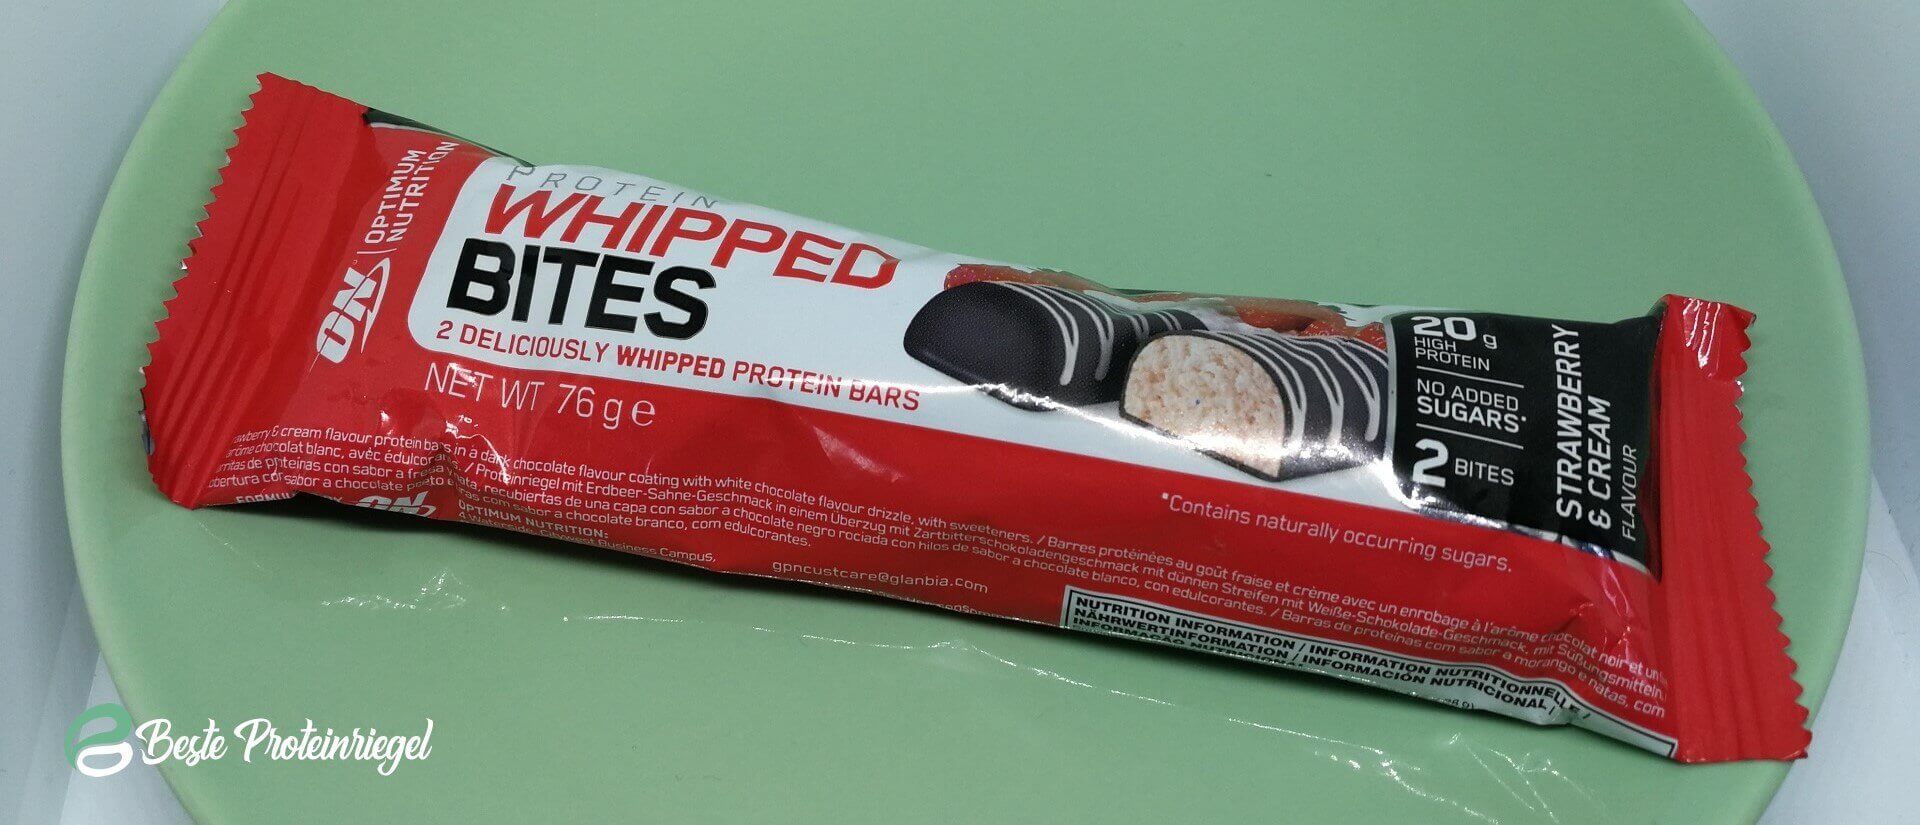 Whipped Bites Verpackung